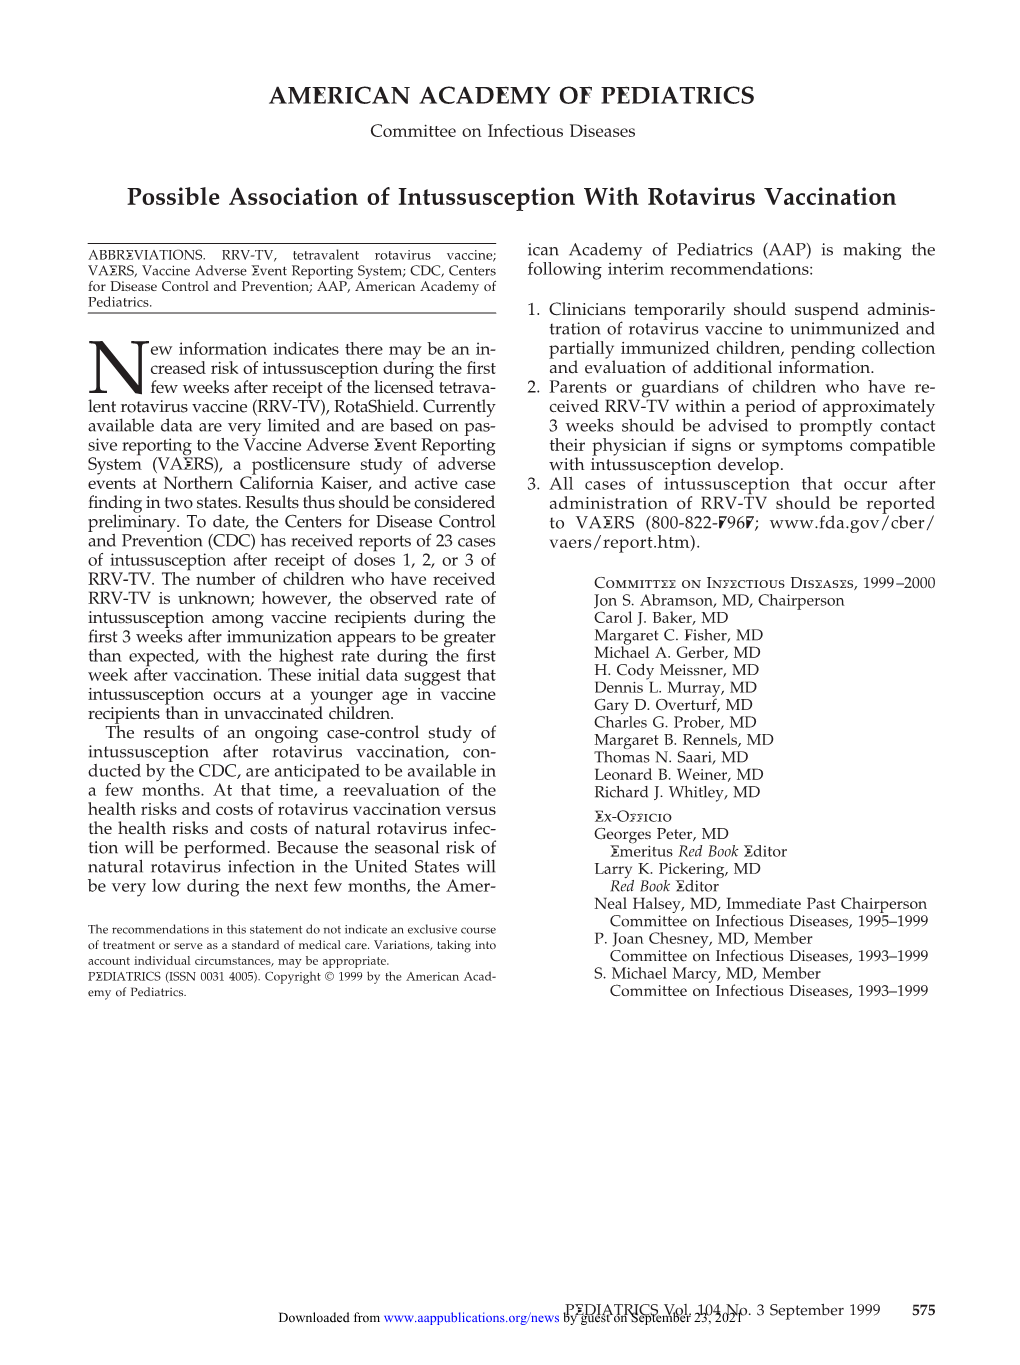 Possible Association of Intussusception with Rotavirus Vaccination